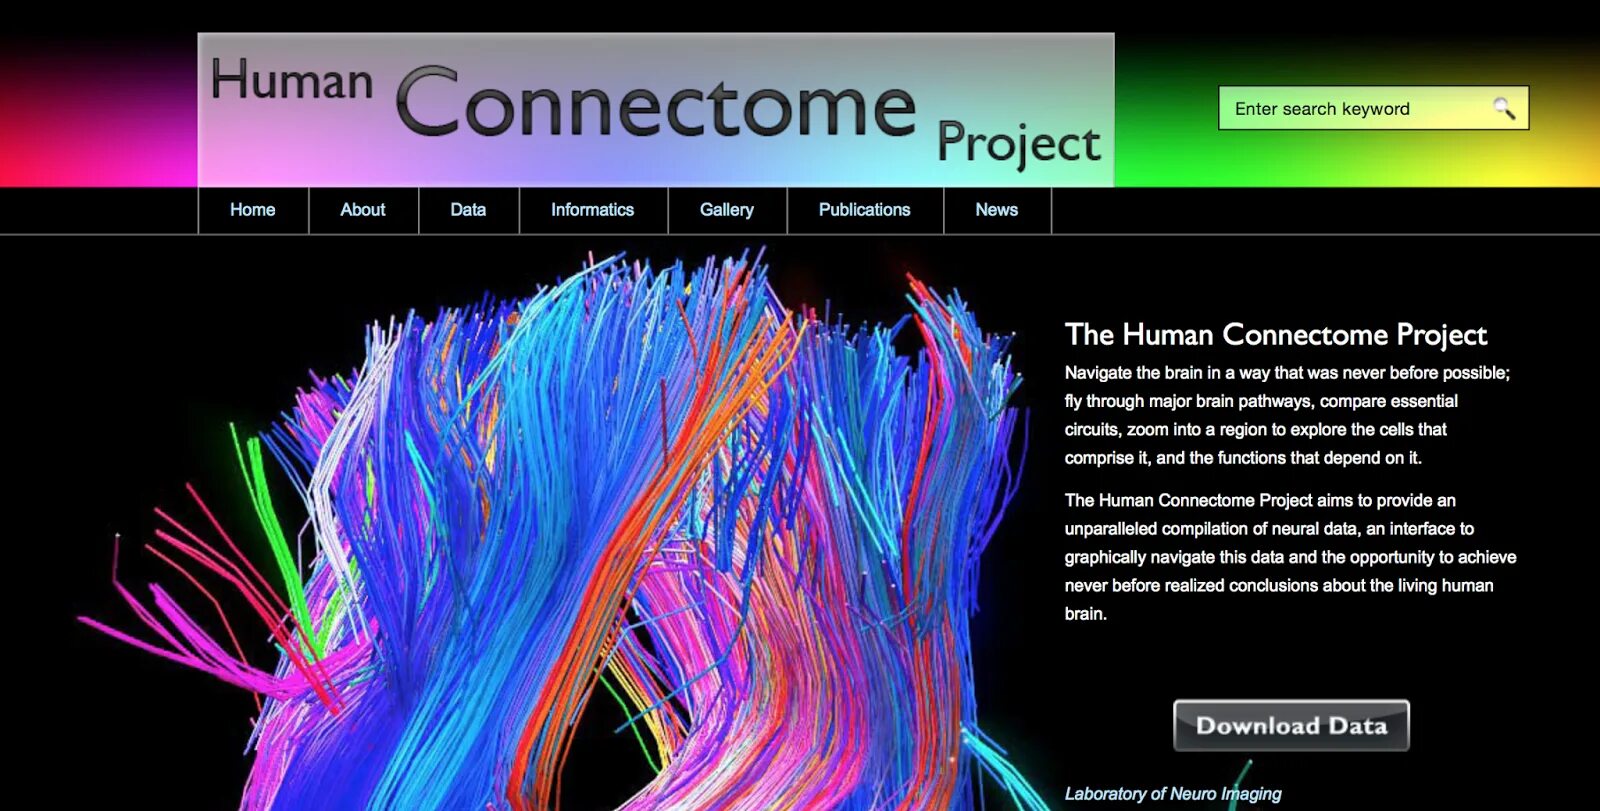 Human org. Human Connectome Project. Human Brain Project. Connectome коннектома. Проект «Human Brain Project» описание.